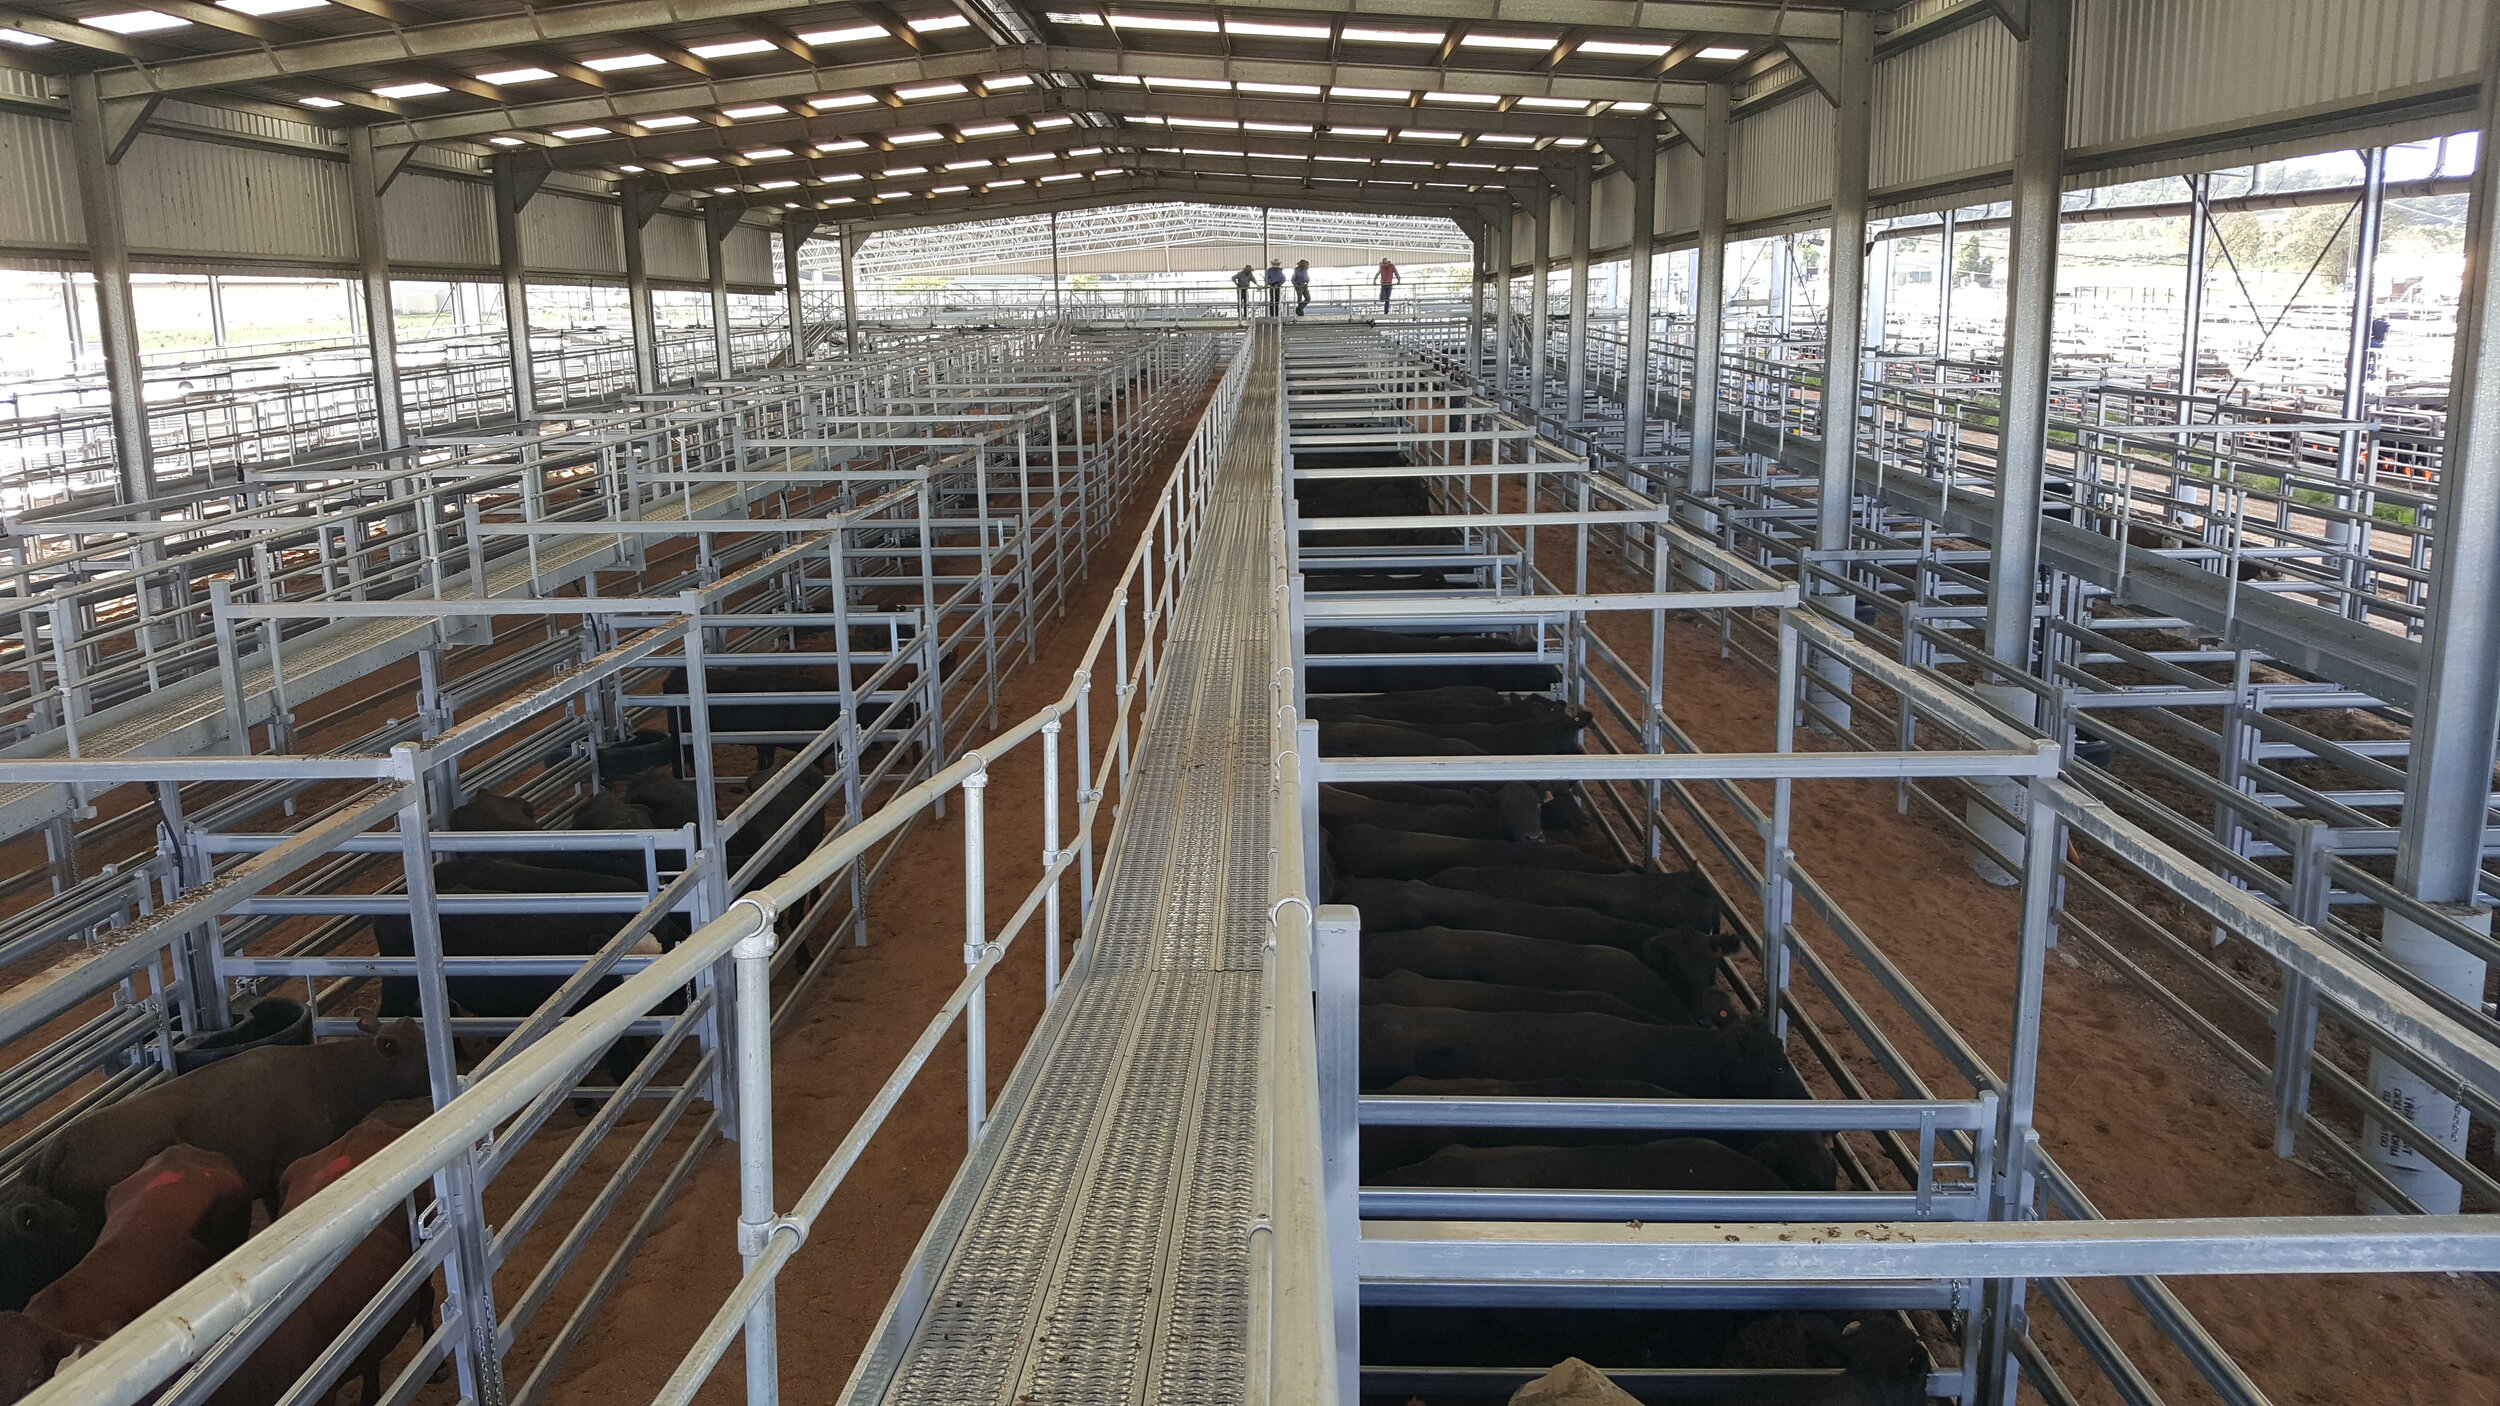 Under shed with cattle in pens.jpg